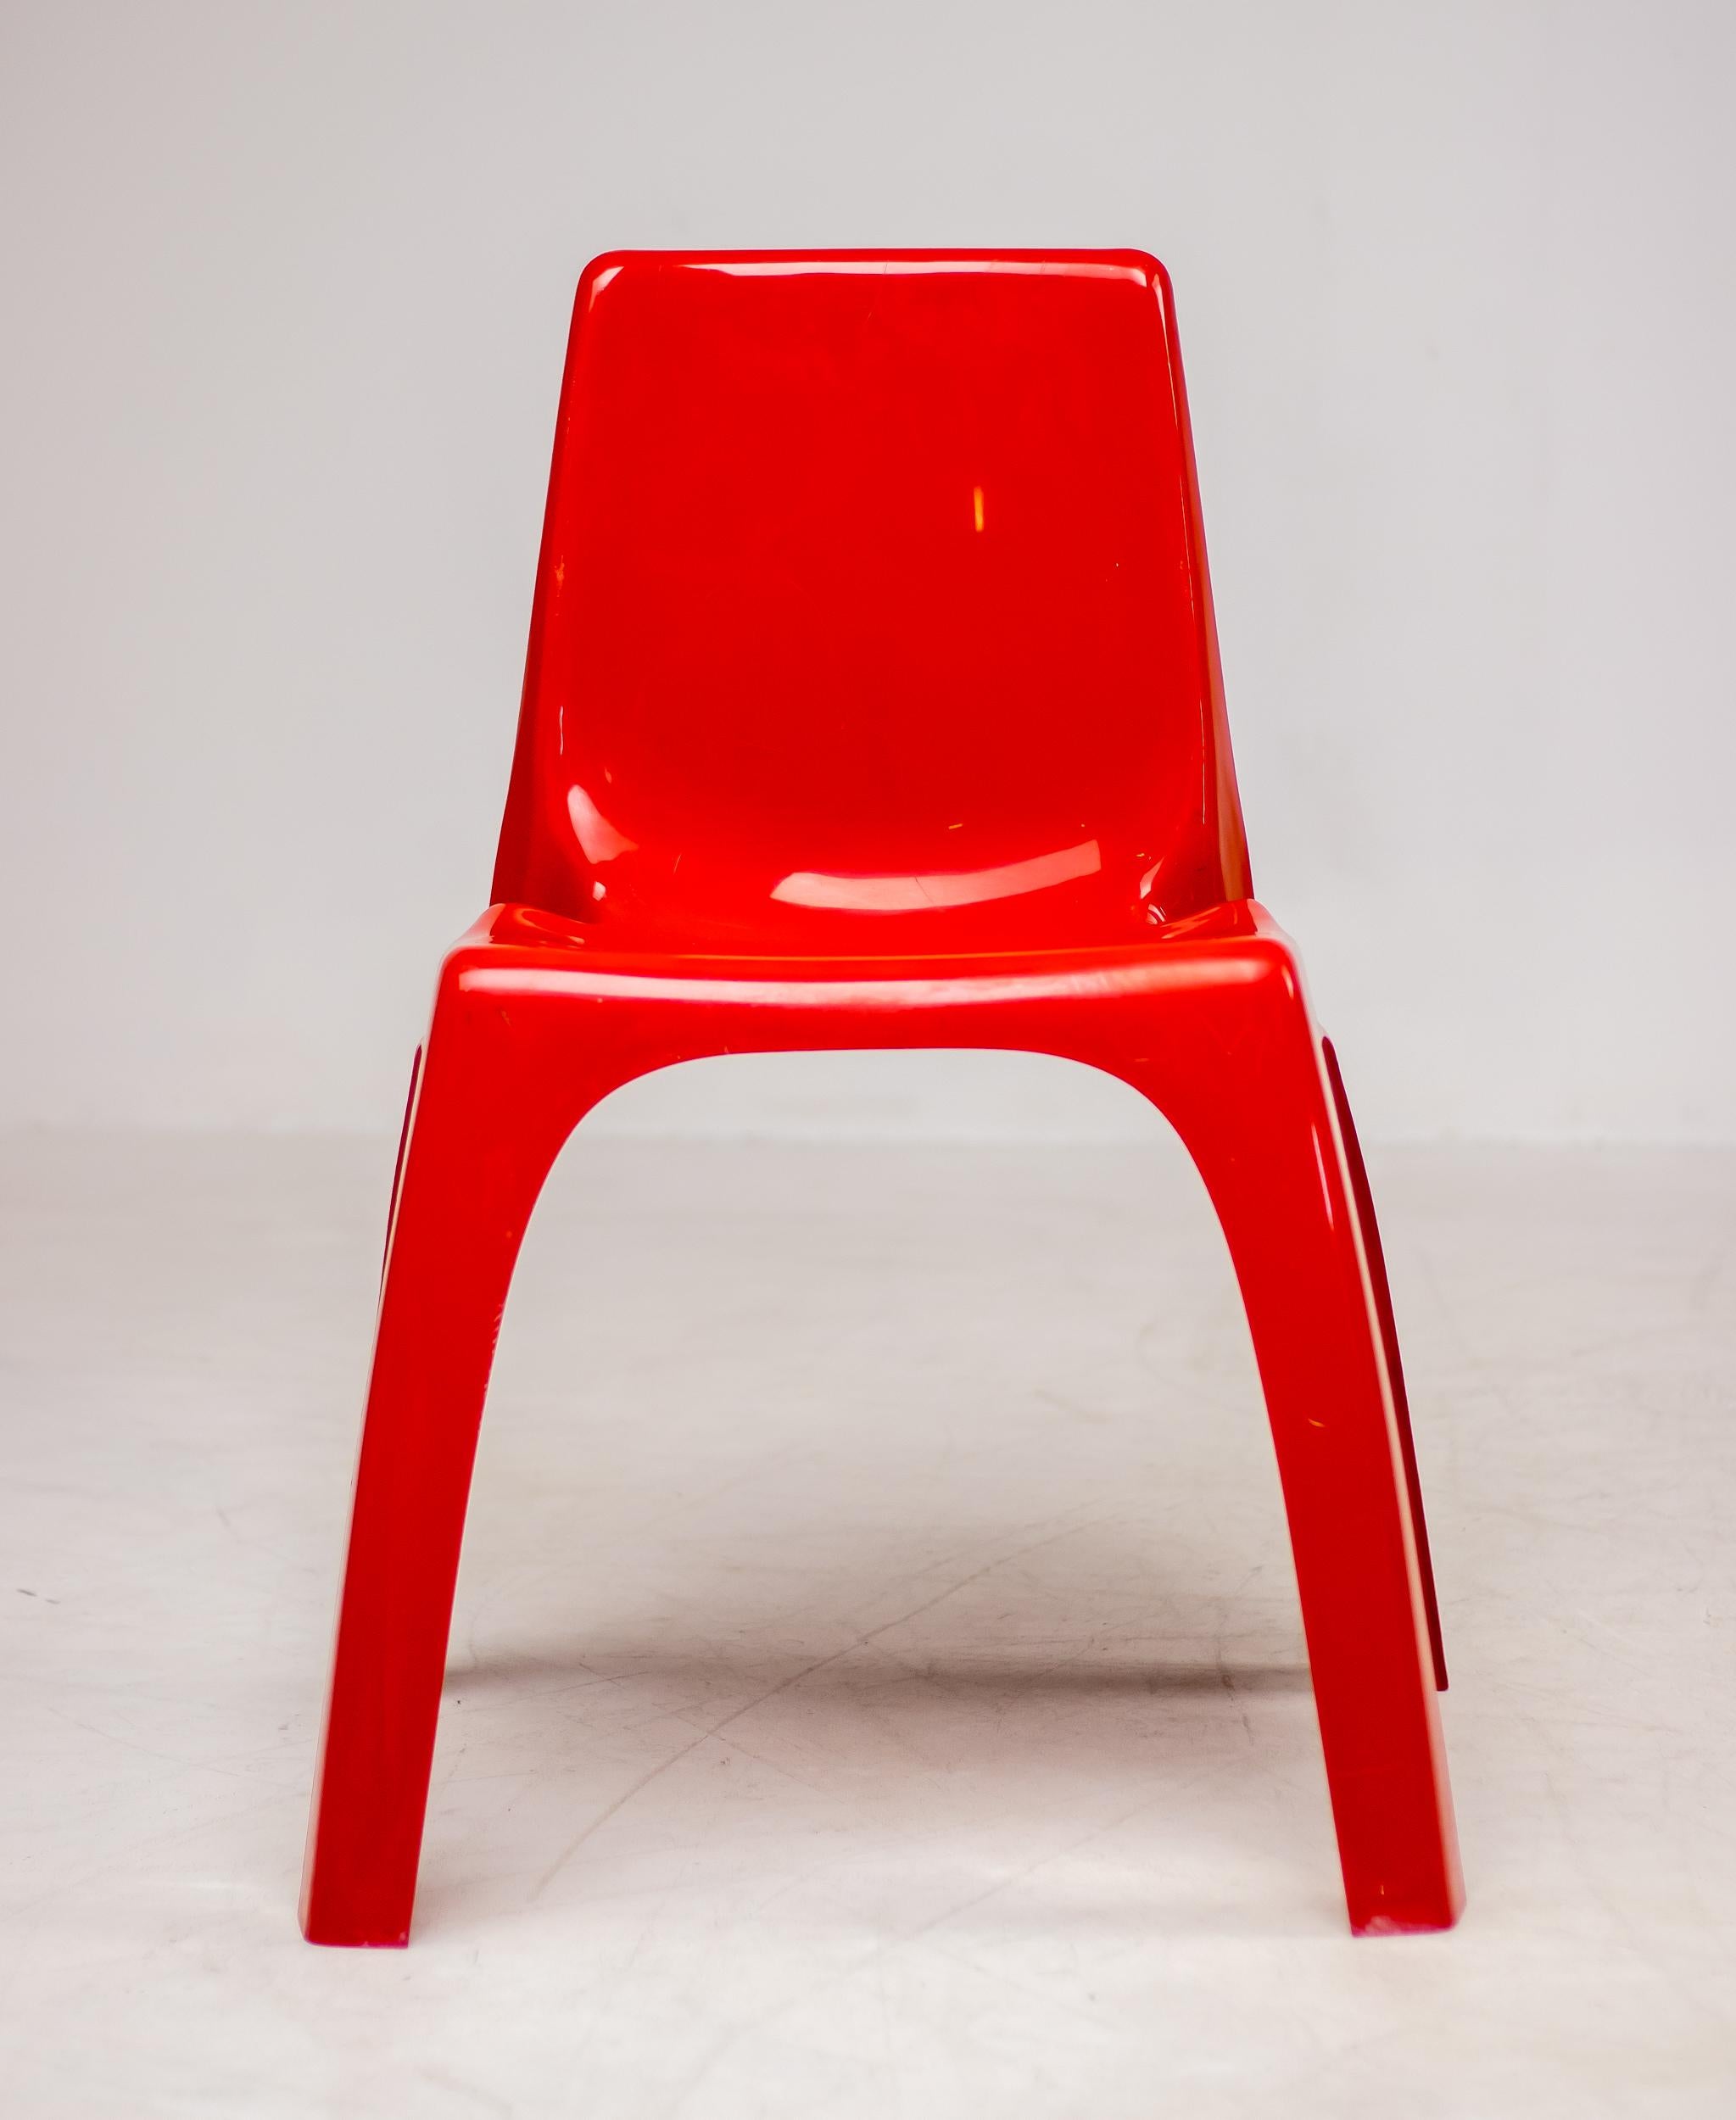 This rare and important chair, designed in 1965 by Giorgina Castiglioni, Giorgio Gaviraghi and Aldo Lanza for Kartell, Milano, is the first ever chair made in the world in a single stackable monocoque, unlike the model 860 designed by Joe Colombo